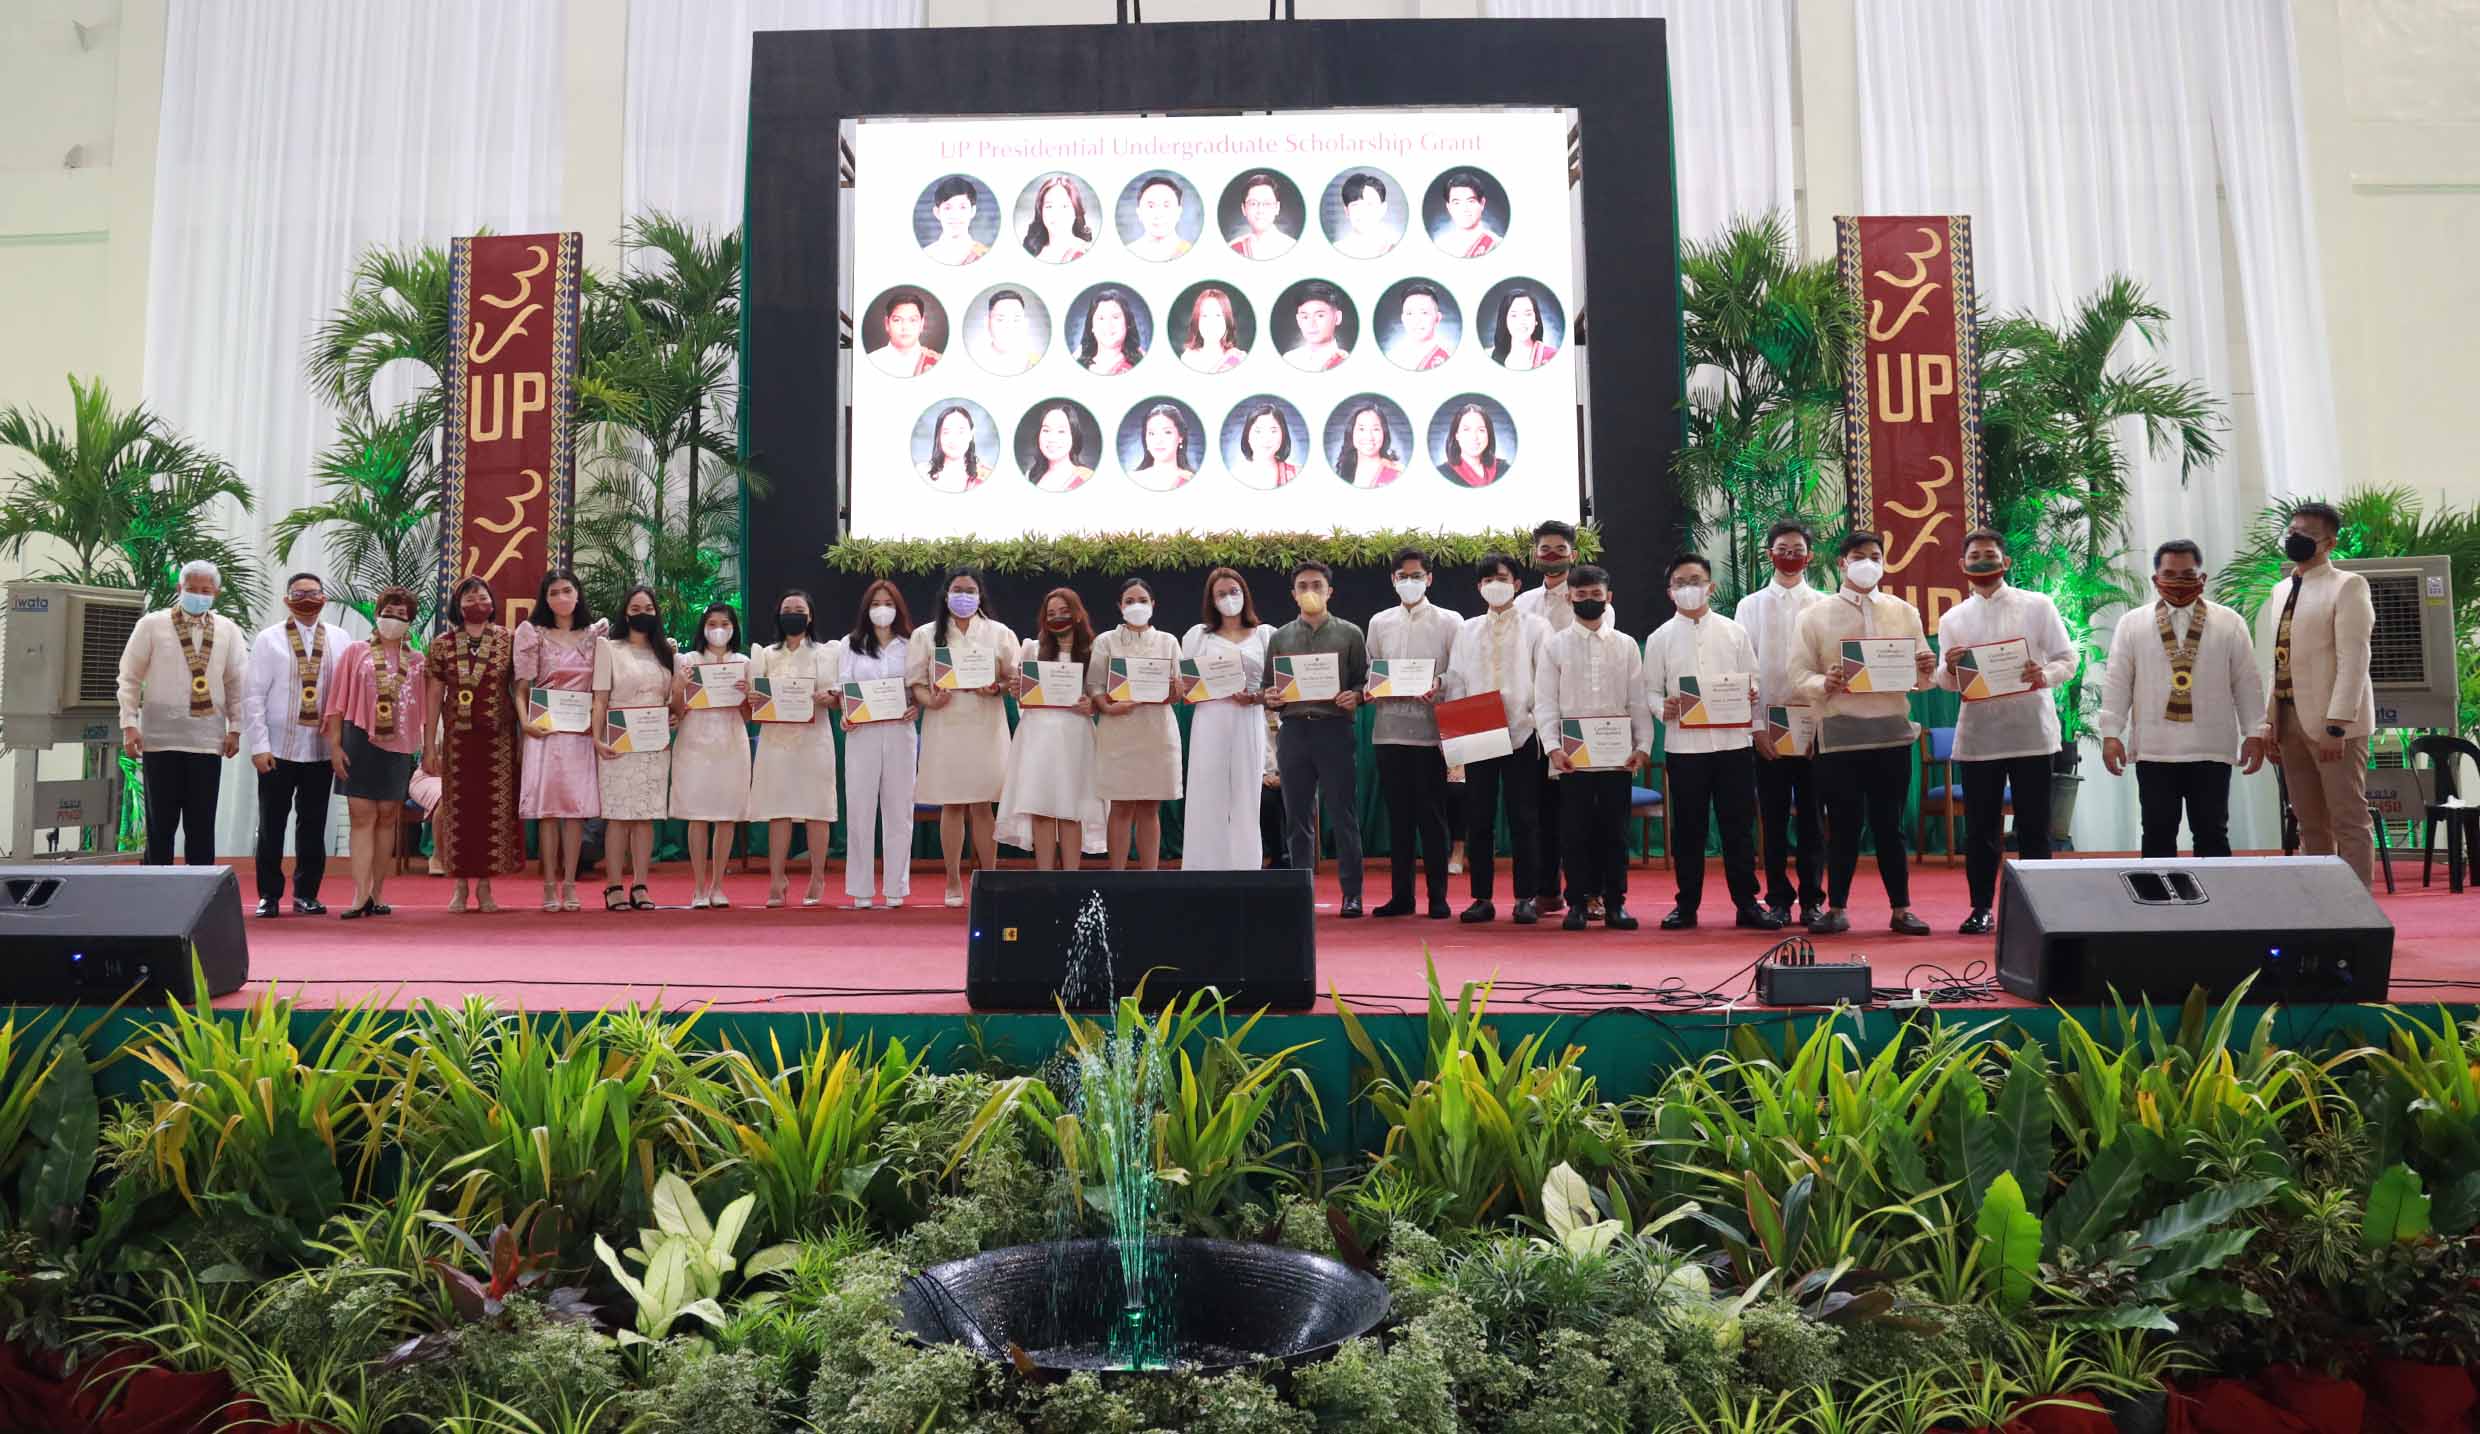 OVCSA holds Parangal 2022 for graduating scholars and donors